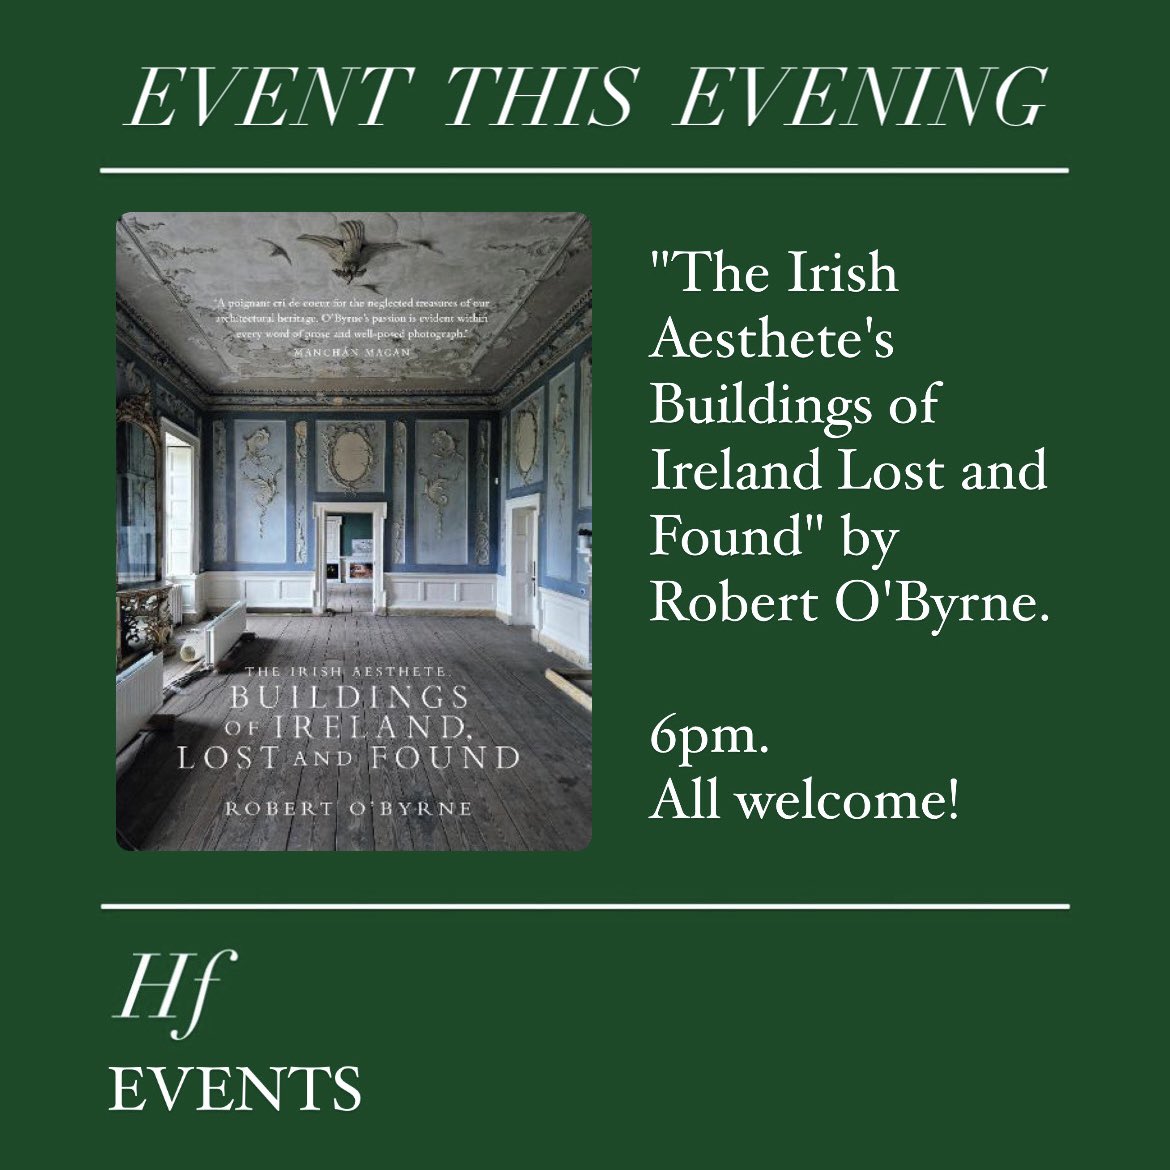 Join us for the launch of “The Irish Aesthete's Buildings of Ireland Lost and Found” by Robert O'Byrne this evening at 6pm. All welcome!